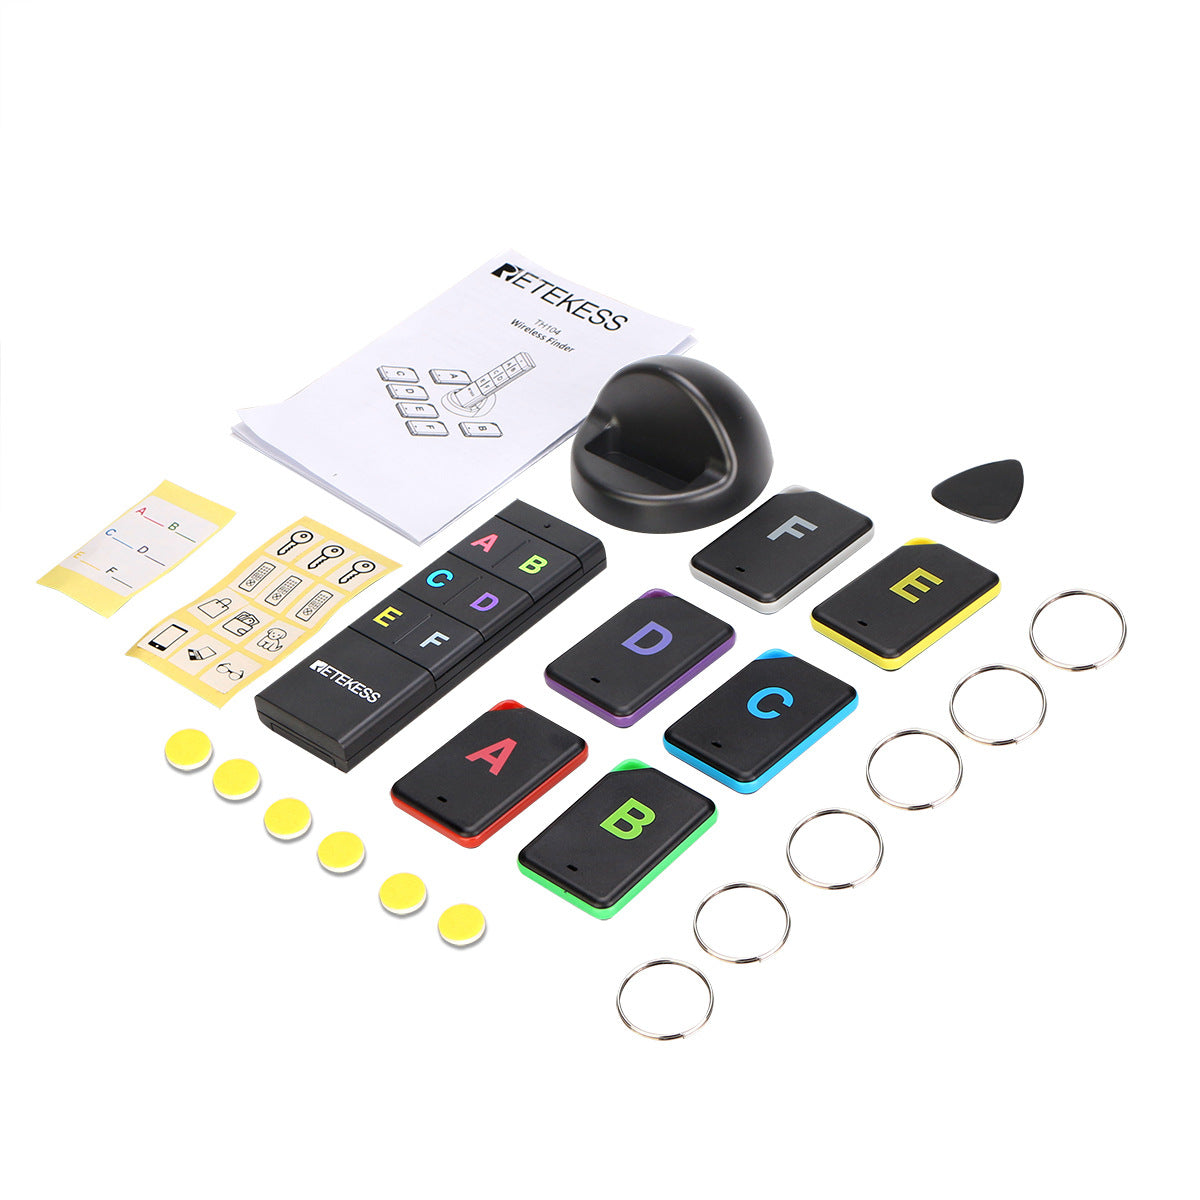 Effortless Tracking: Wireless Object Finder & Item Locator - 40 Meters Range, Multi-Receiver Design for Everyday Convenience